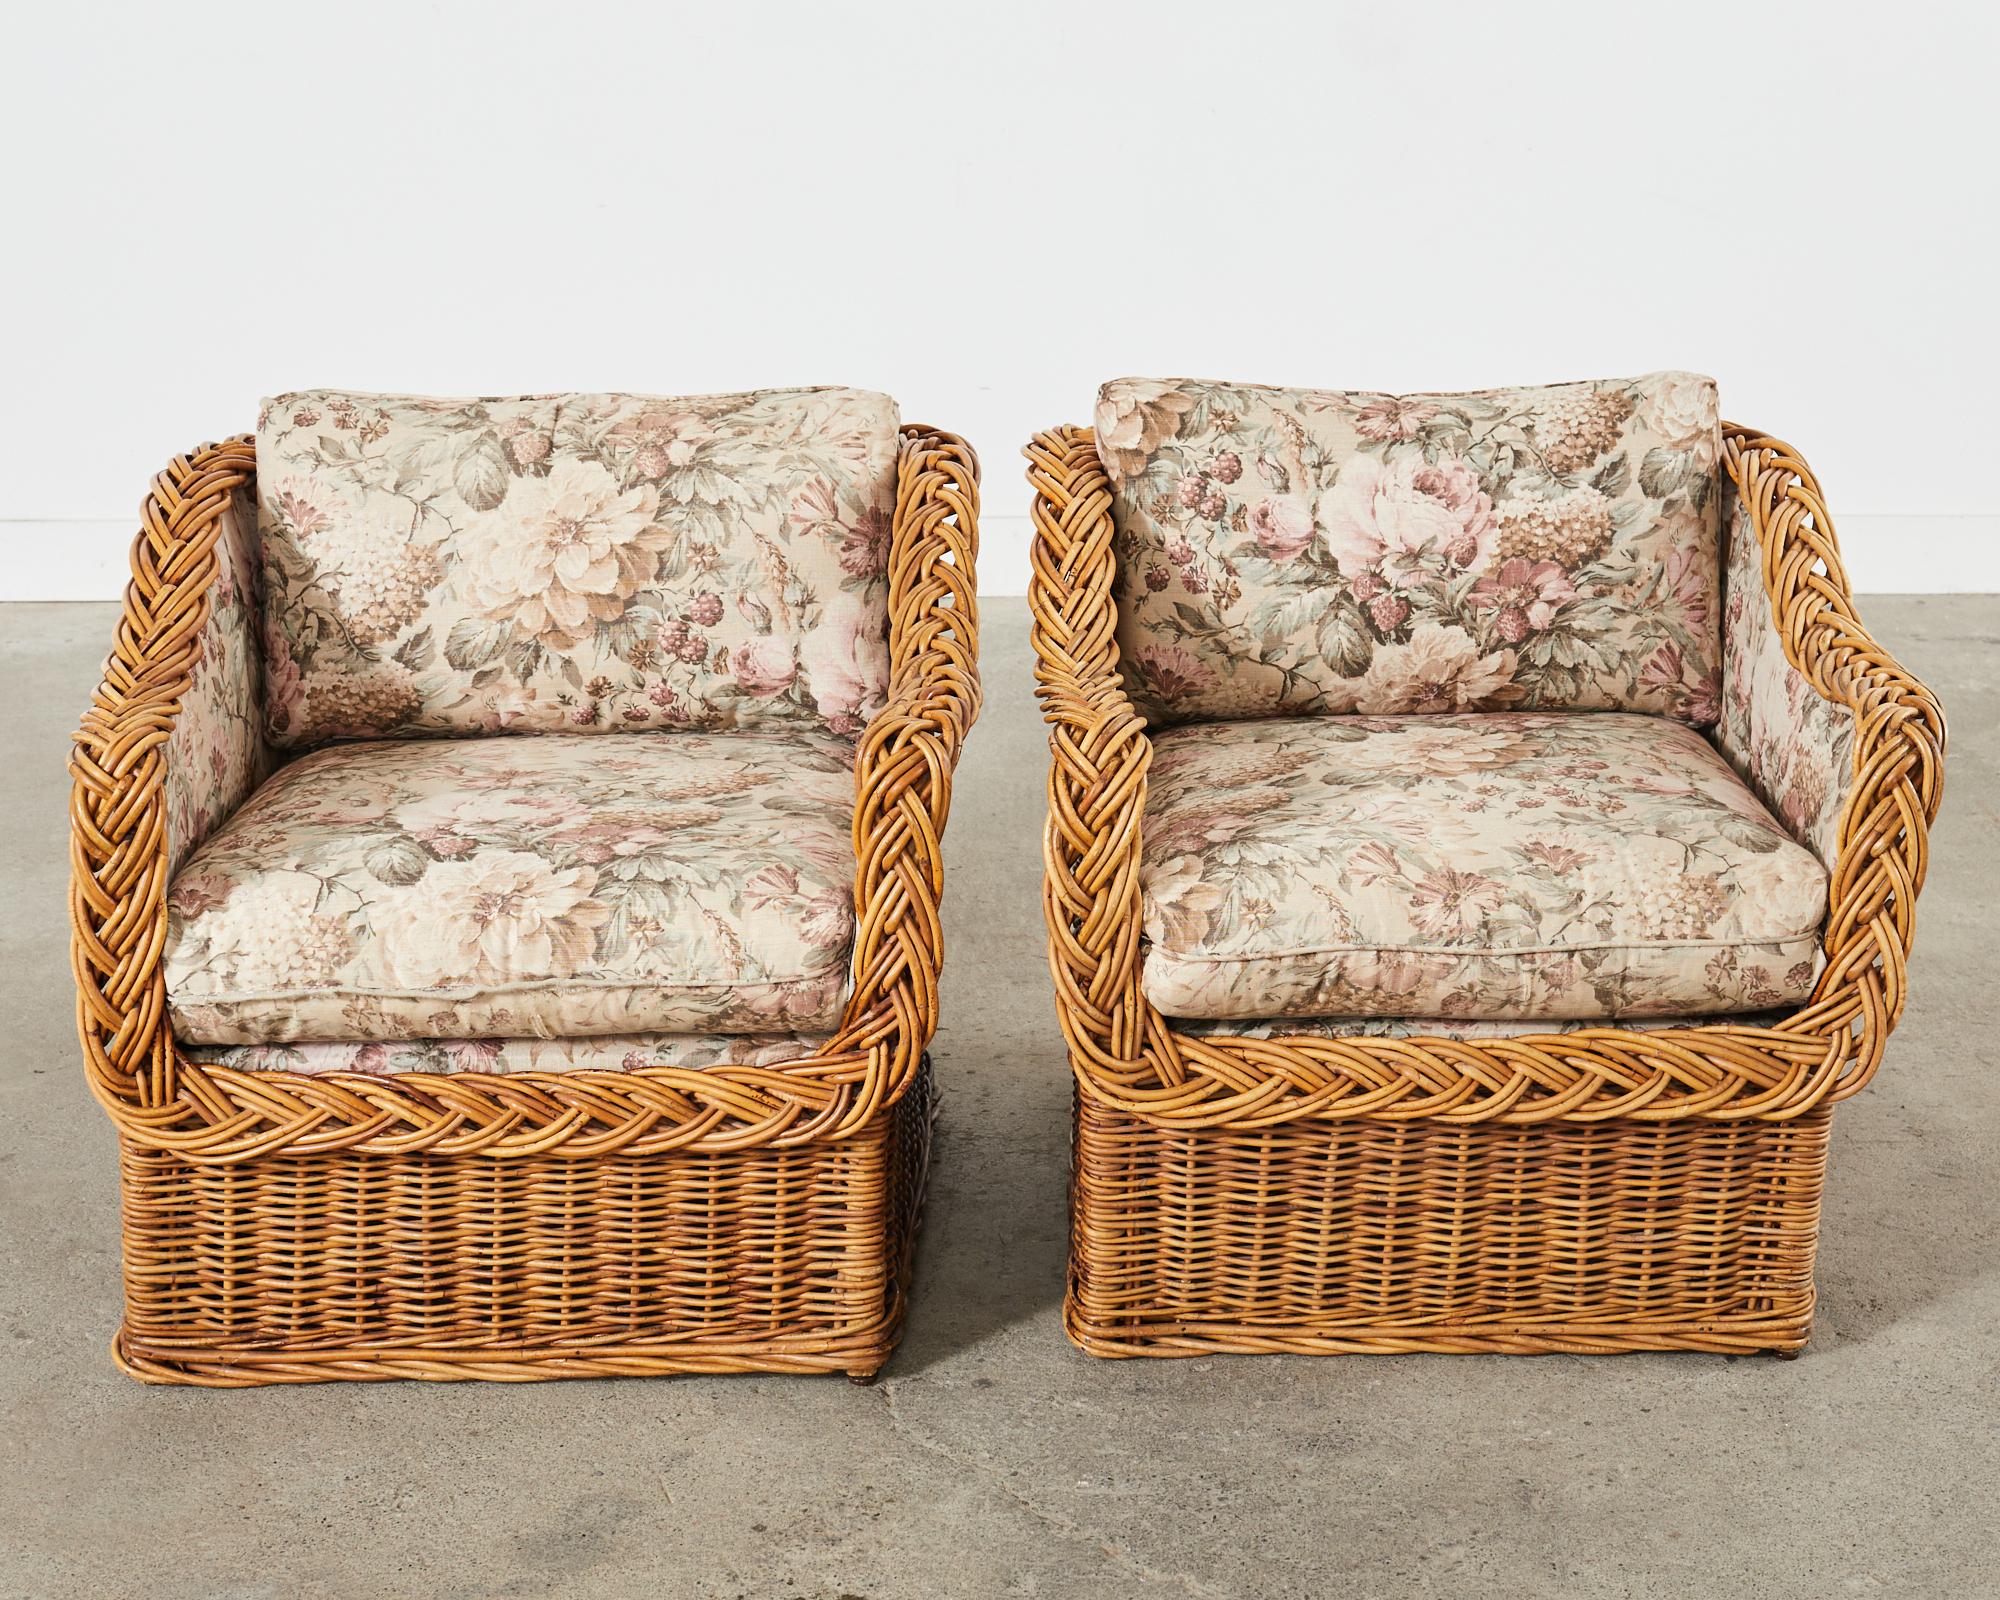 20th Century Pair of Italian Wicker Works Rattan Lounge Chairs & Ottoman  For Sale